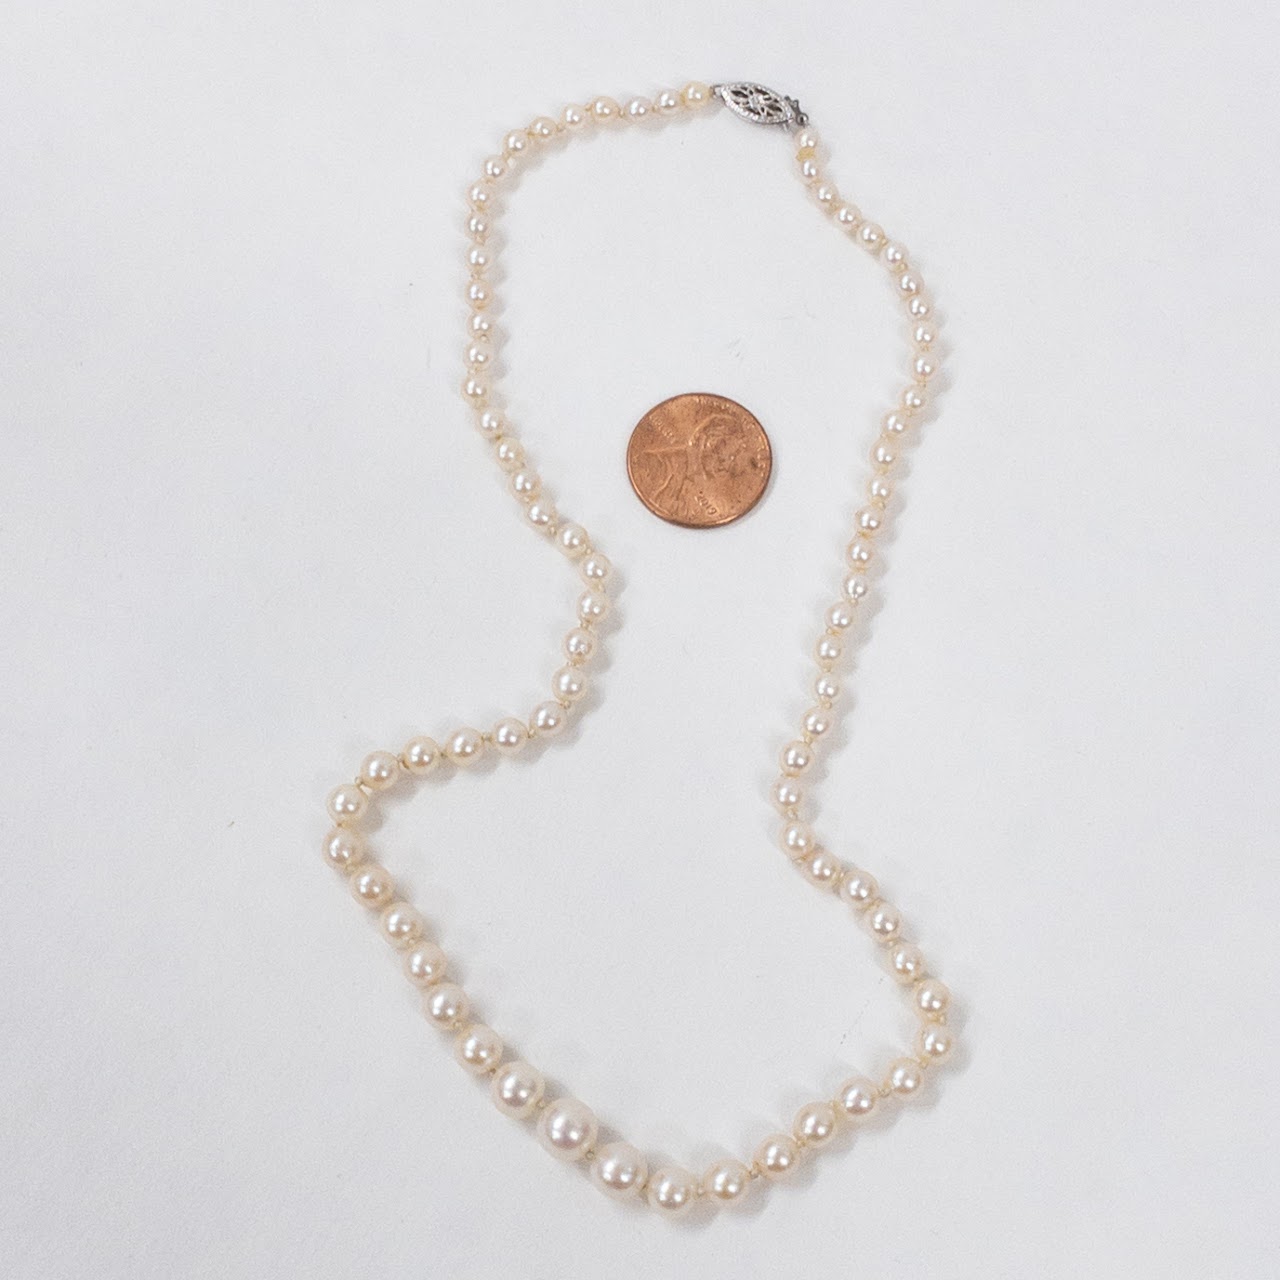 14K White Gold and Graduated Pearl Choker Necklace